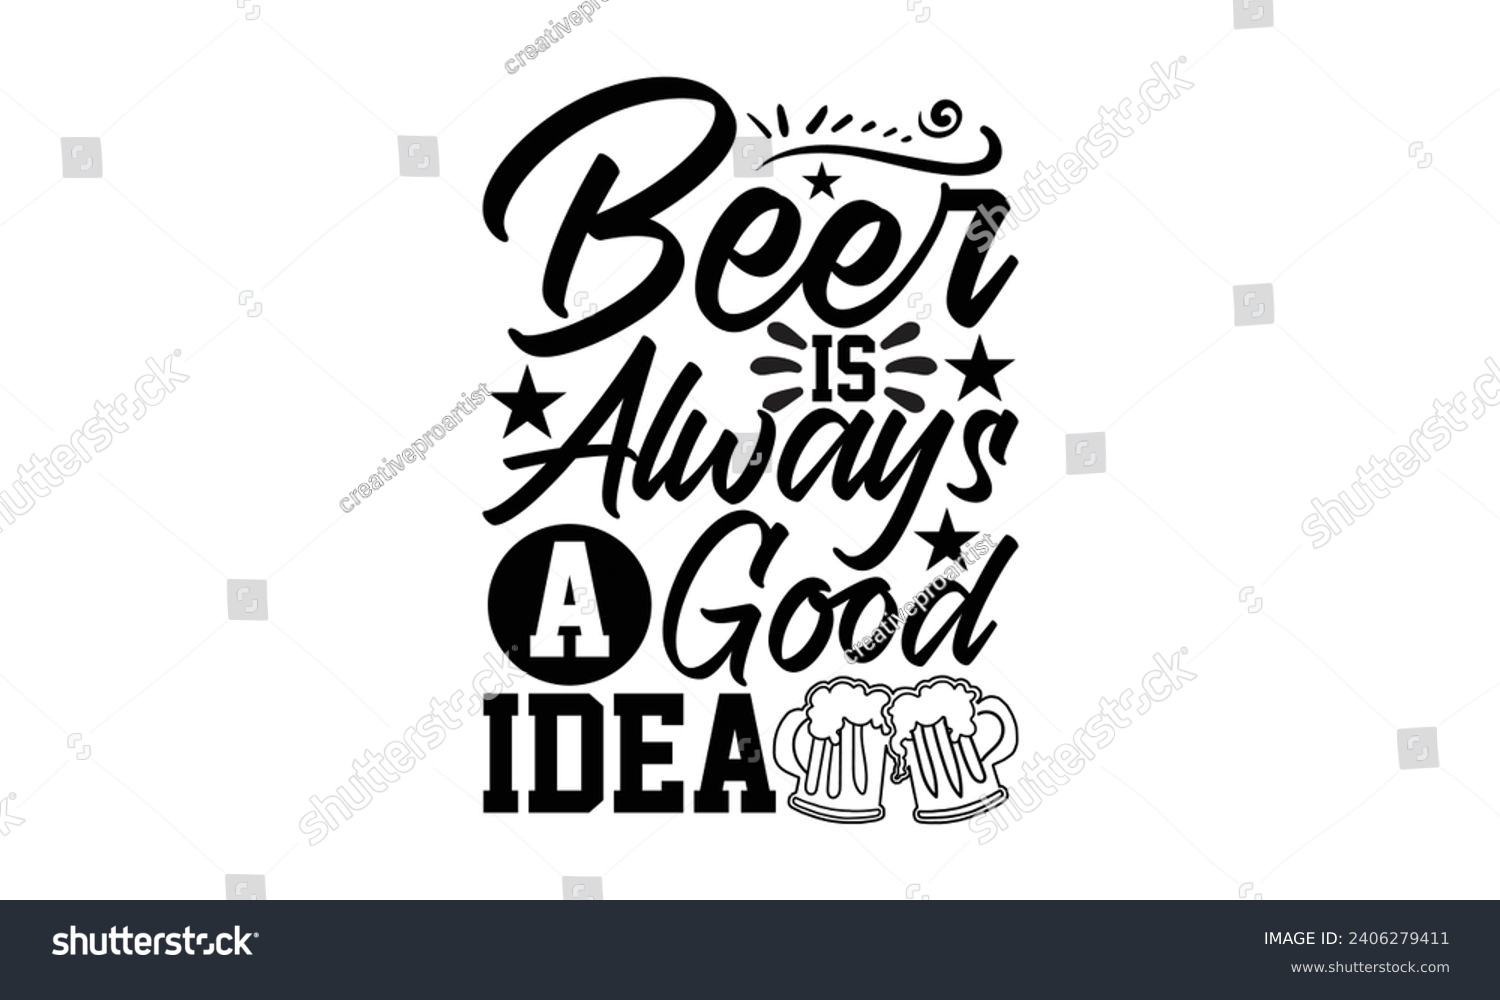 SVG of Beer Is Always A Good Idea- Beer t- shirt design, Handmade calligraphy vector illustration for Cutting Machine, Silhouette Cameo, Cricut, Vector illustration Template. svg